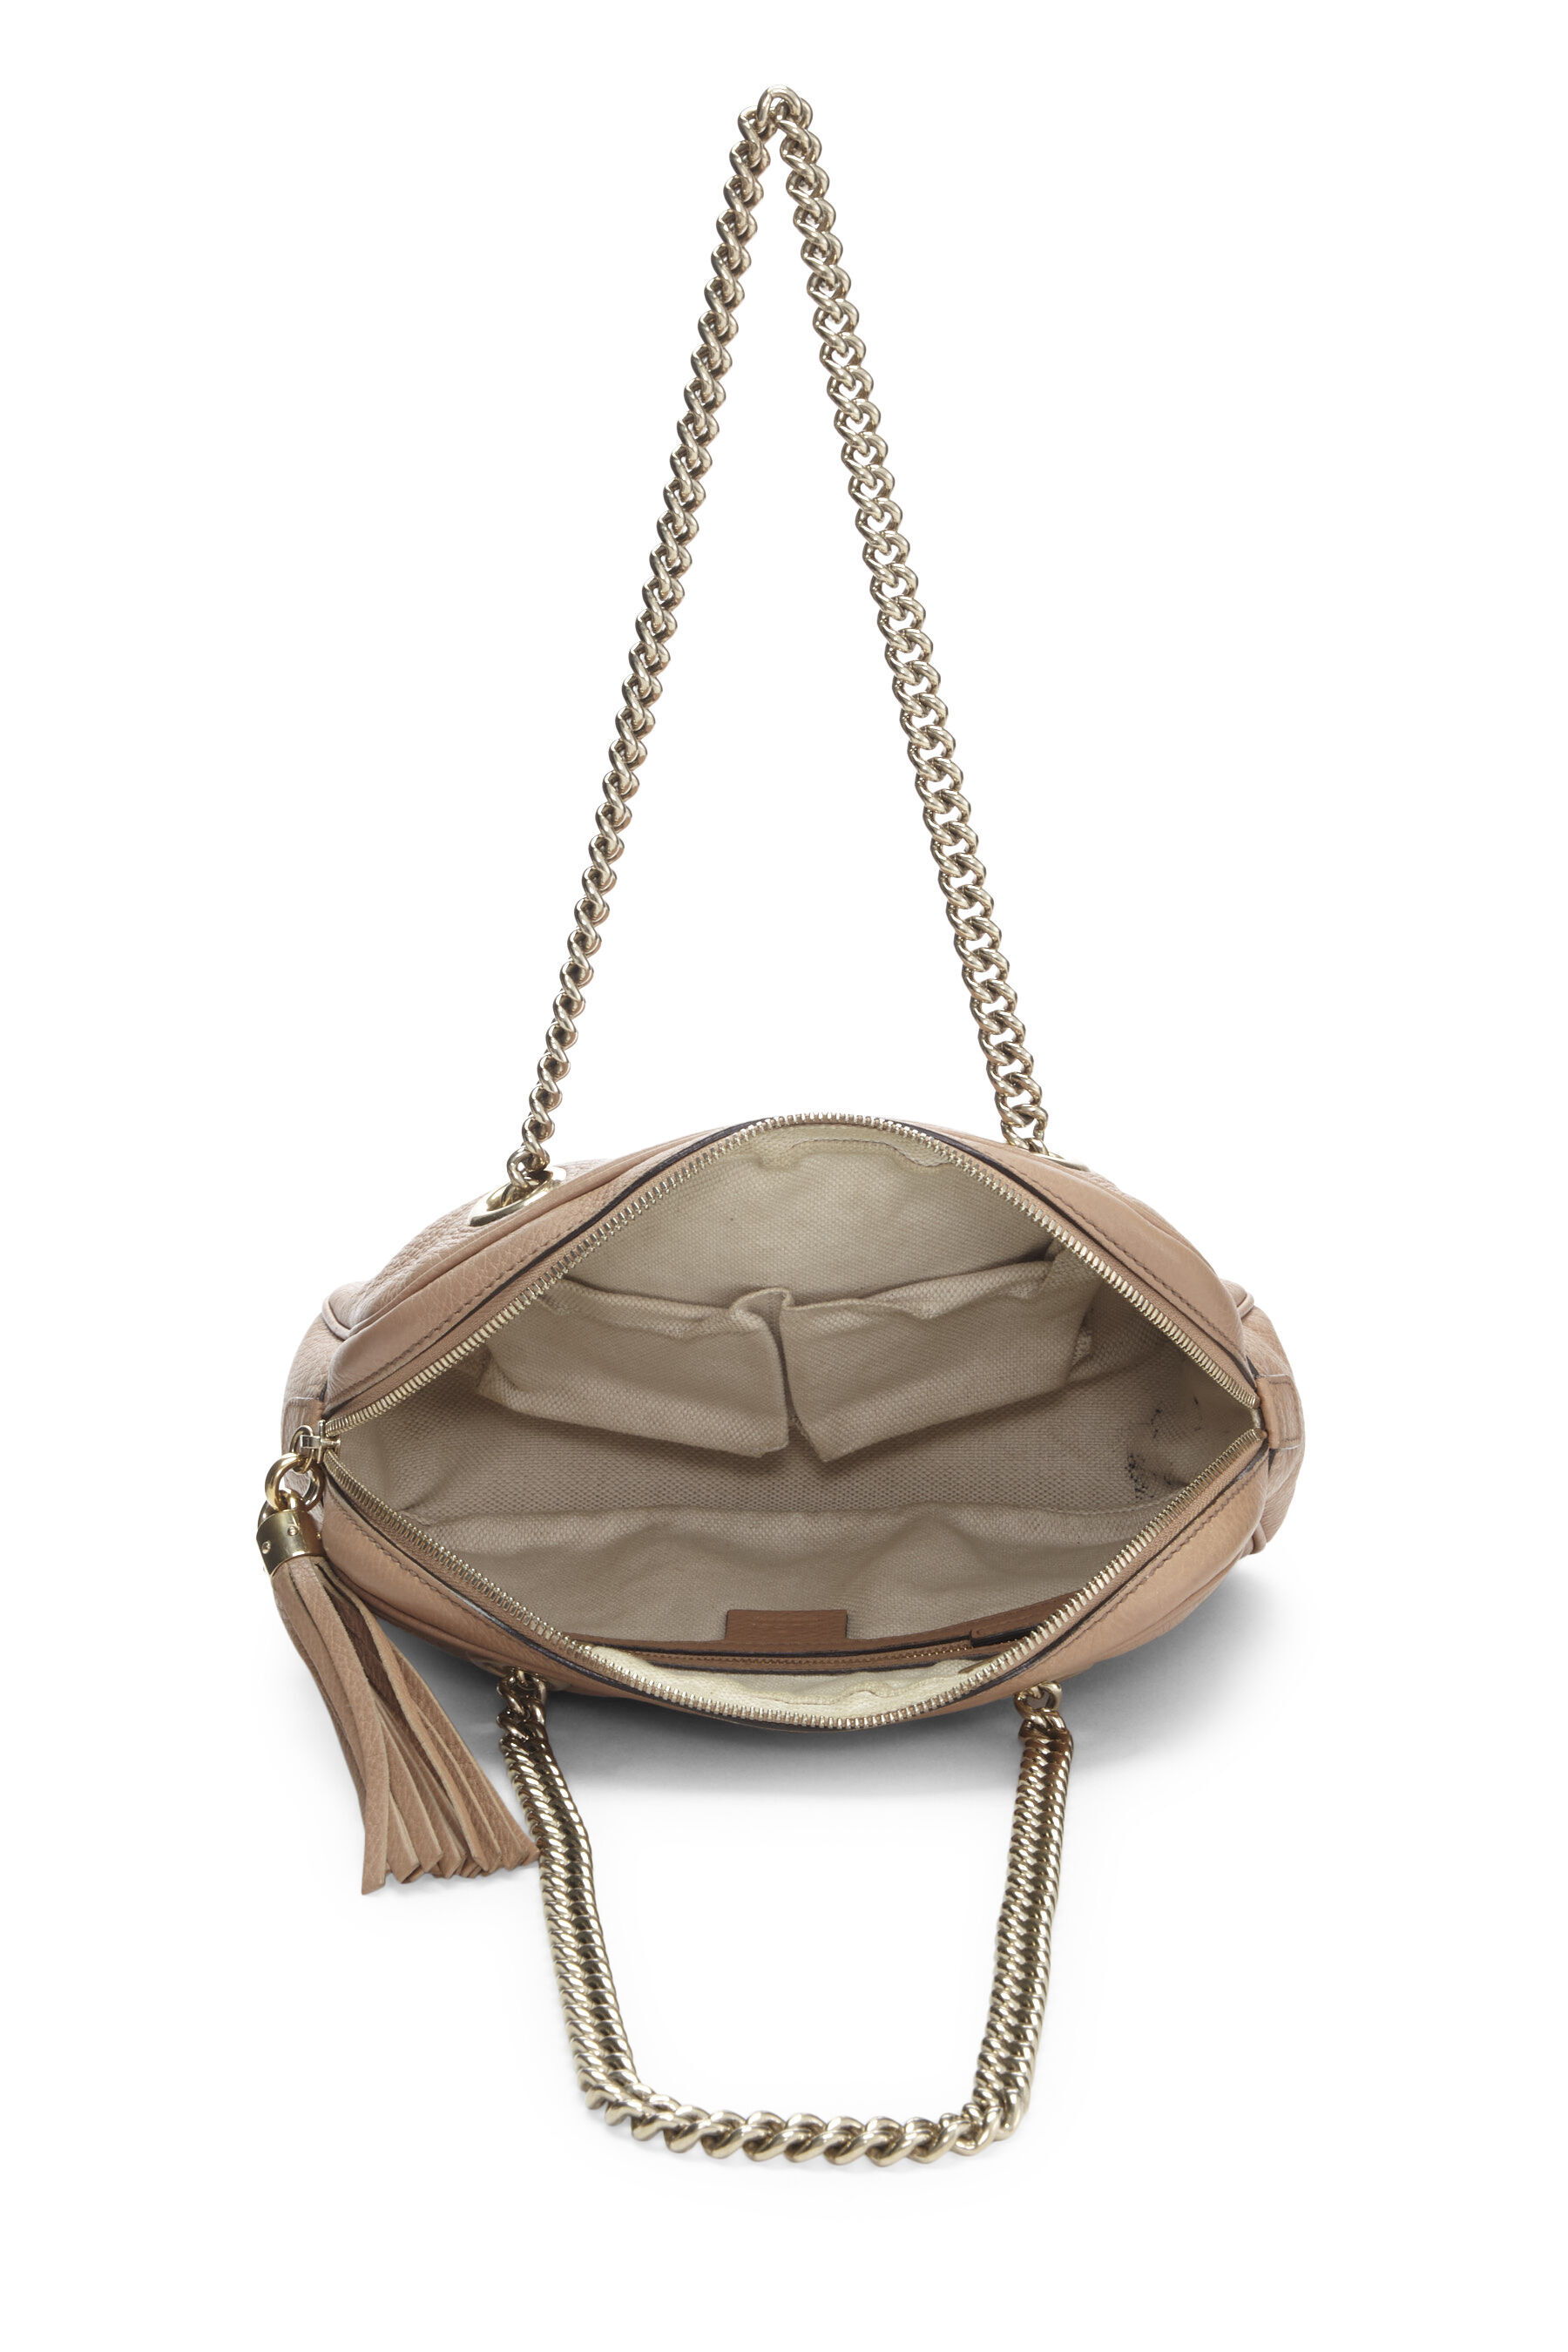 Chanel Ice Cube Vinyl & Leather Single Flap Double Chain Bag in Metallic  Gold - ShopStyle